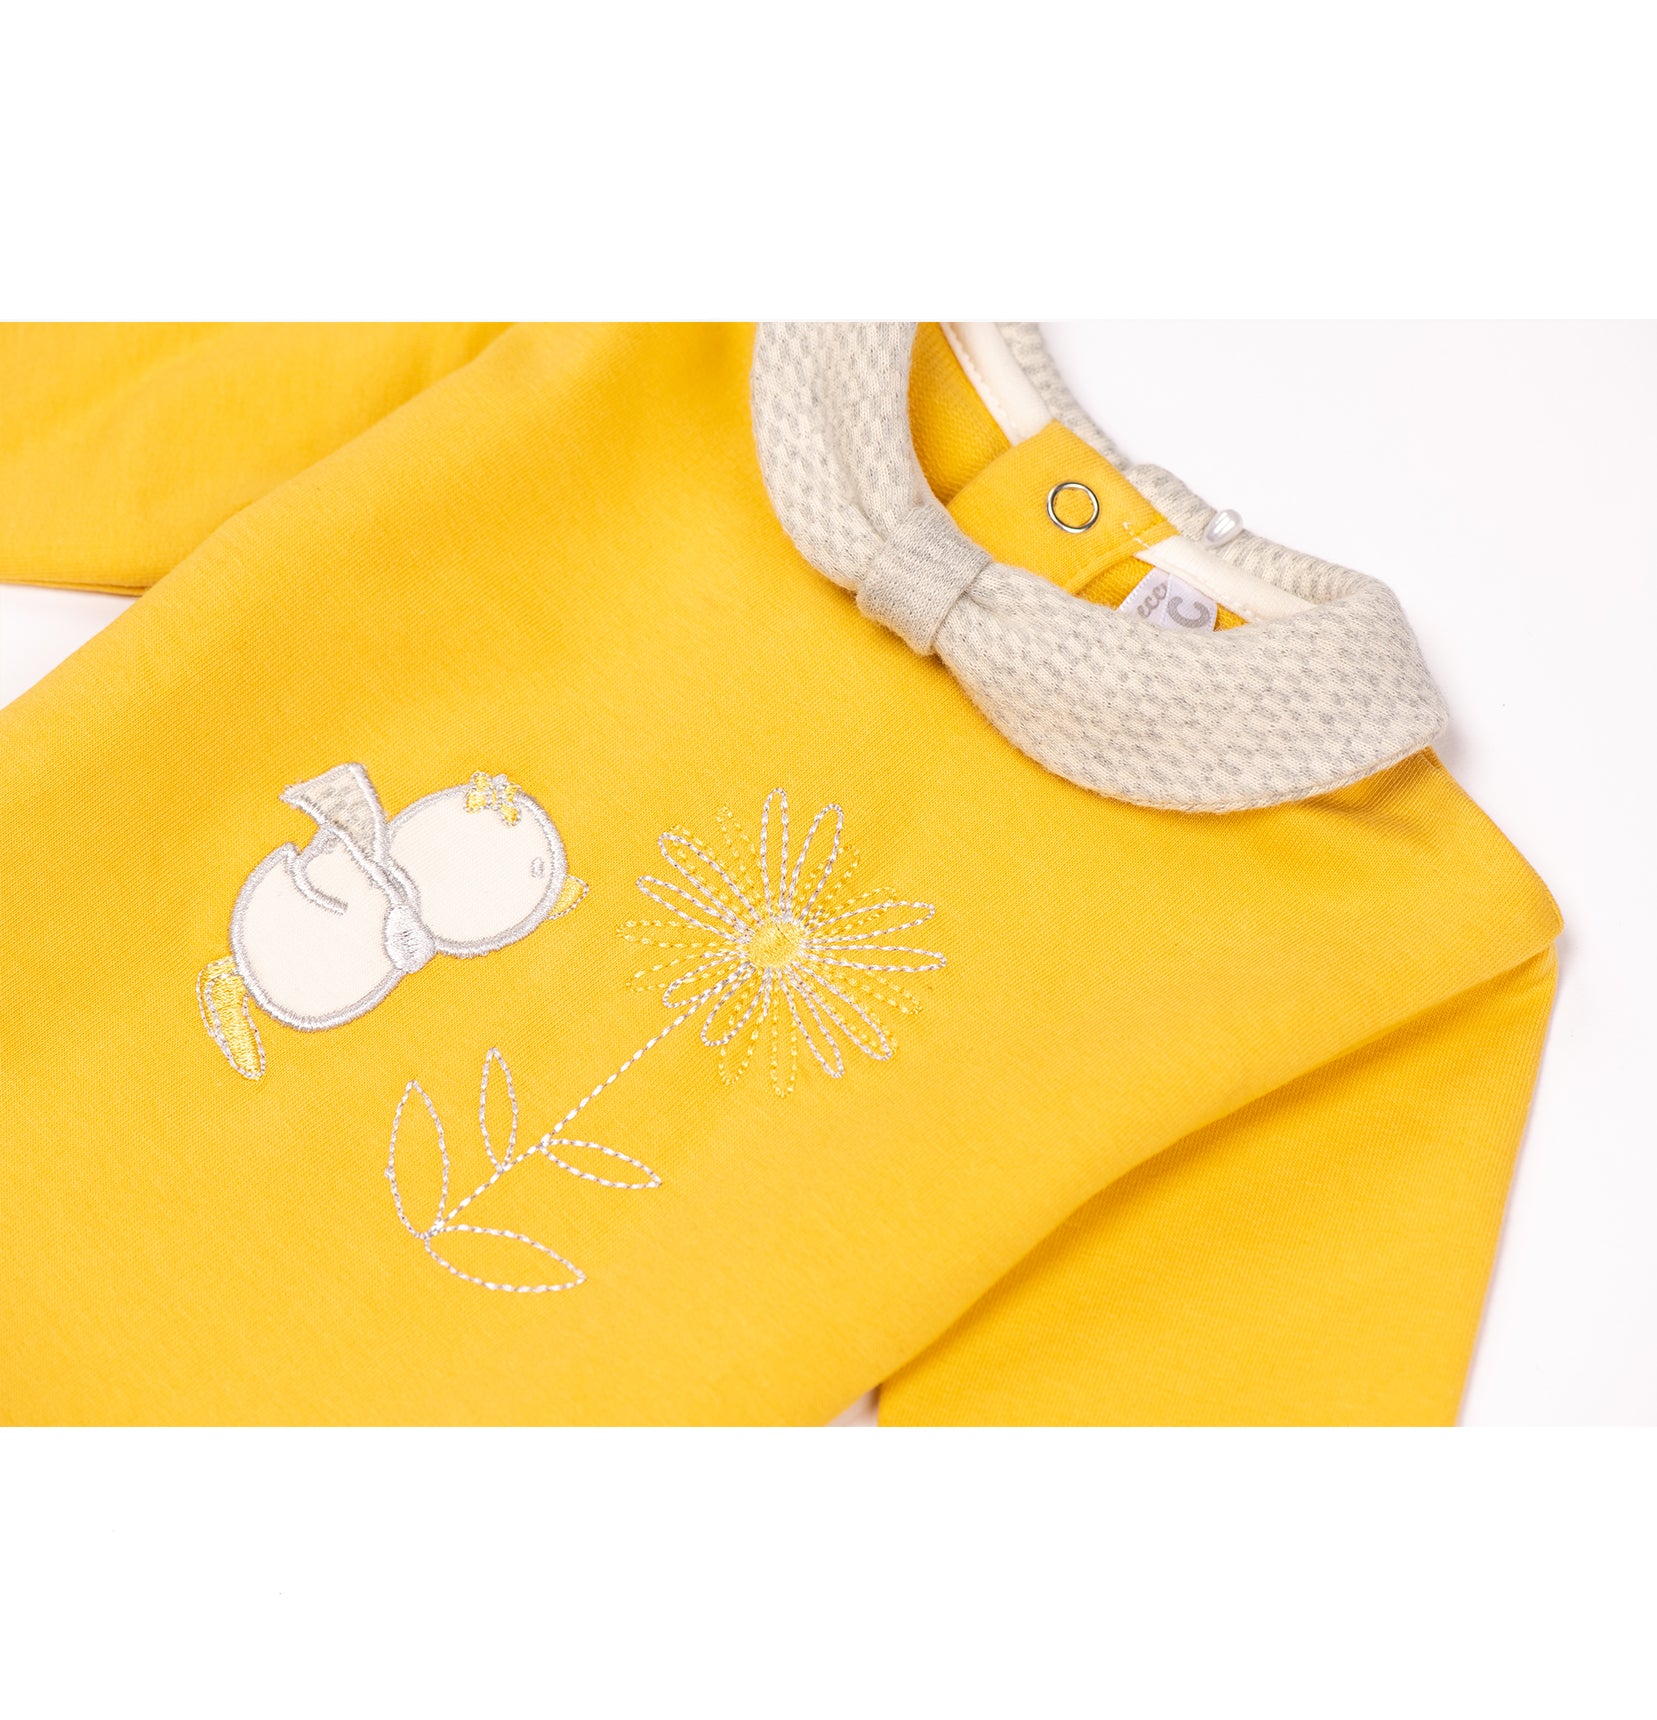 Cool long sleeve baby girl top by Pompelo